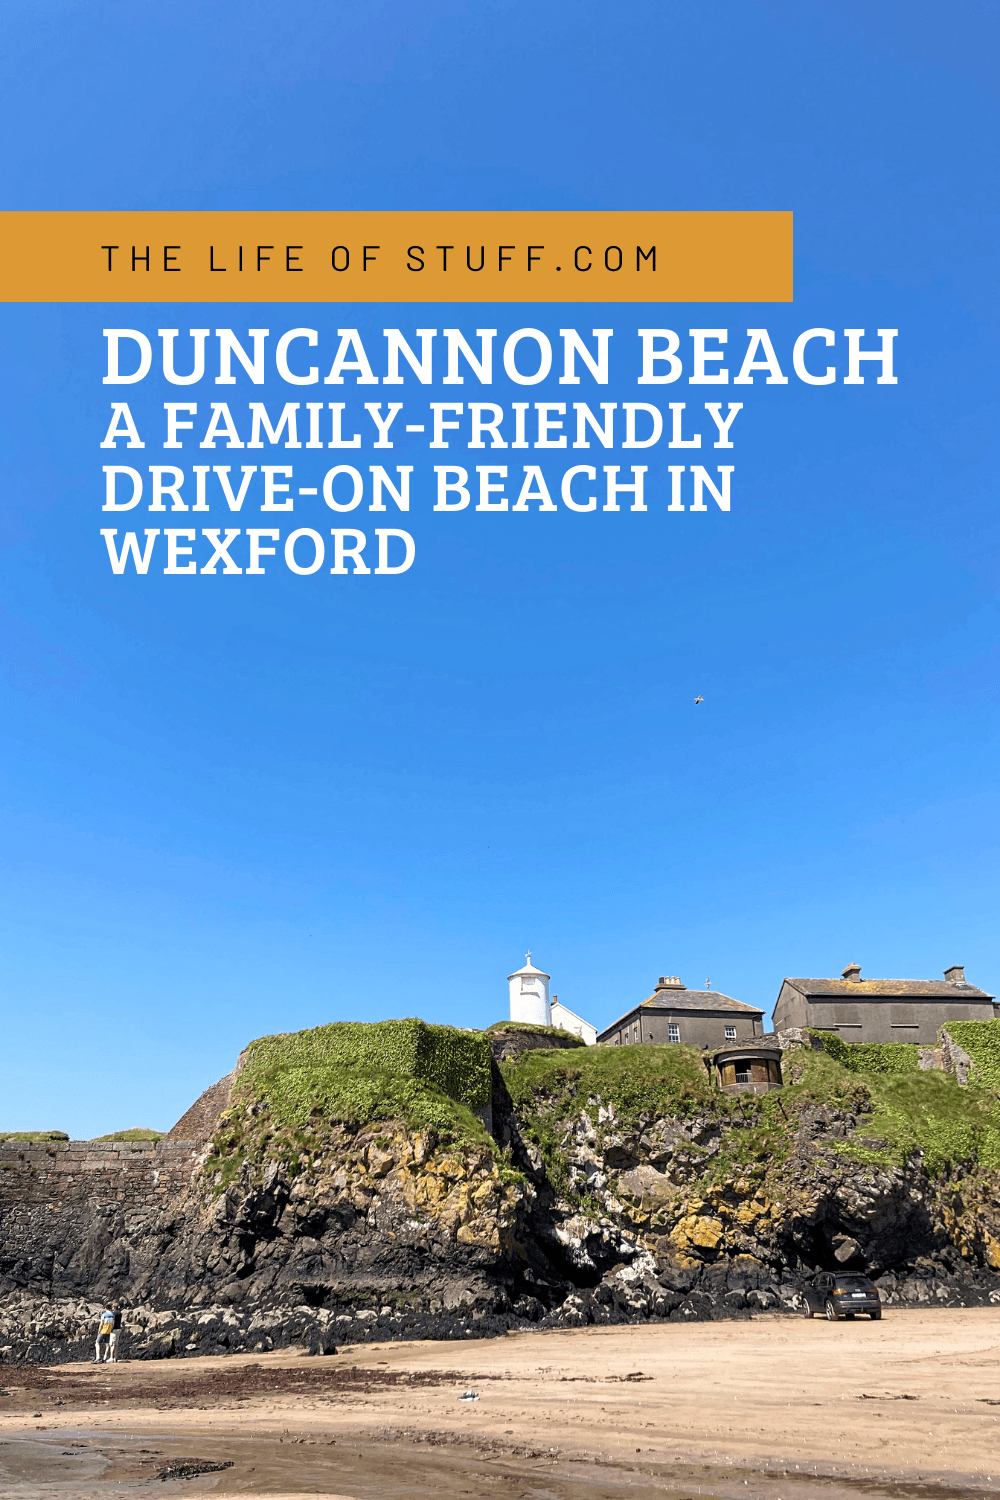 Duncannon Beach - Family-Friendly Drive On Beach, Wexford - The Life of Stuff